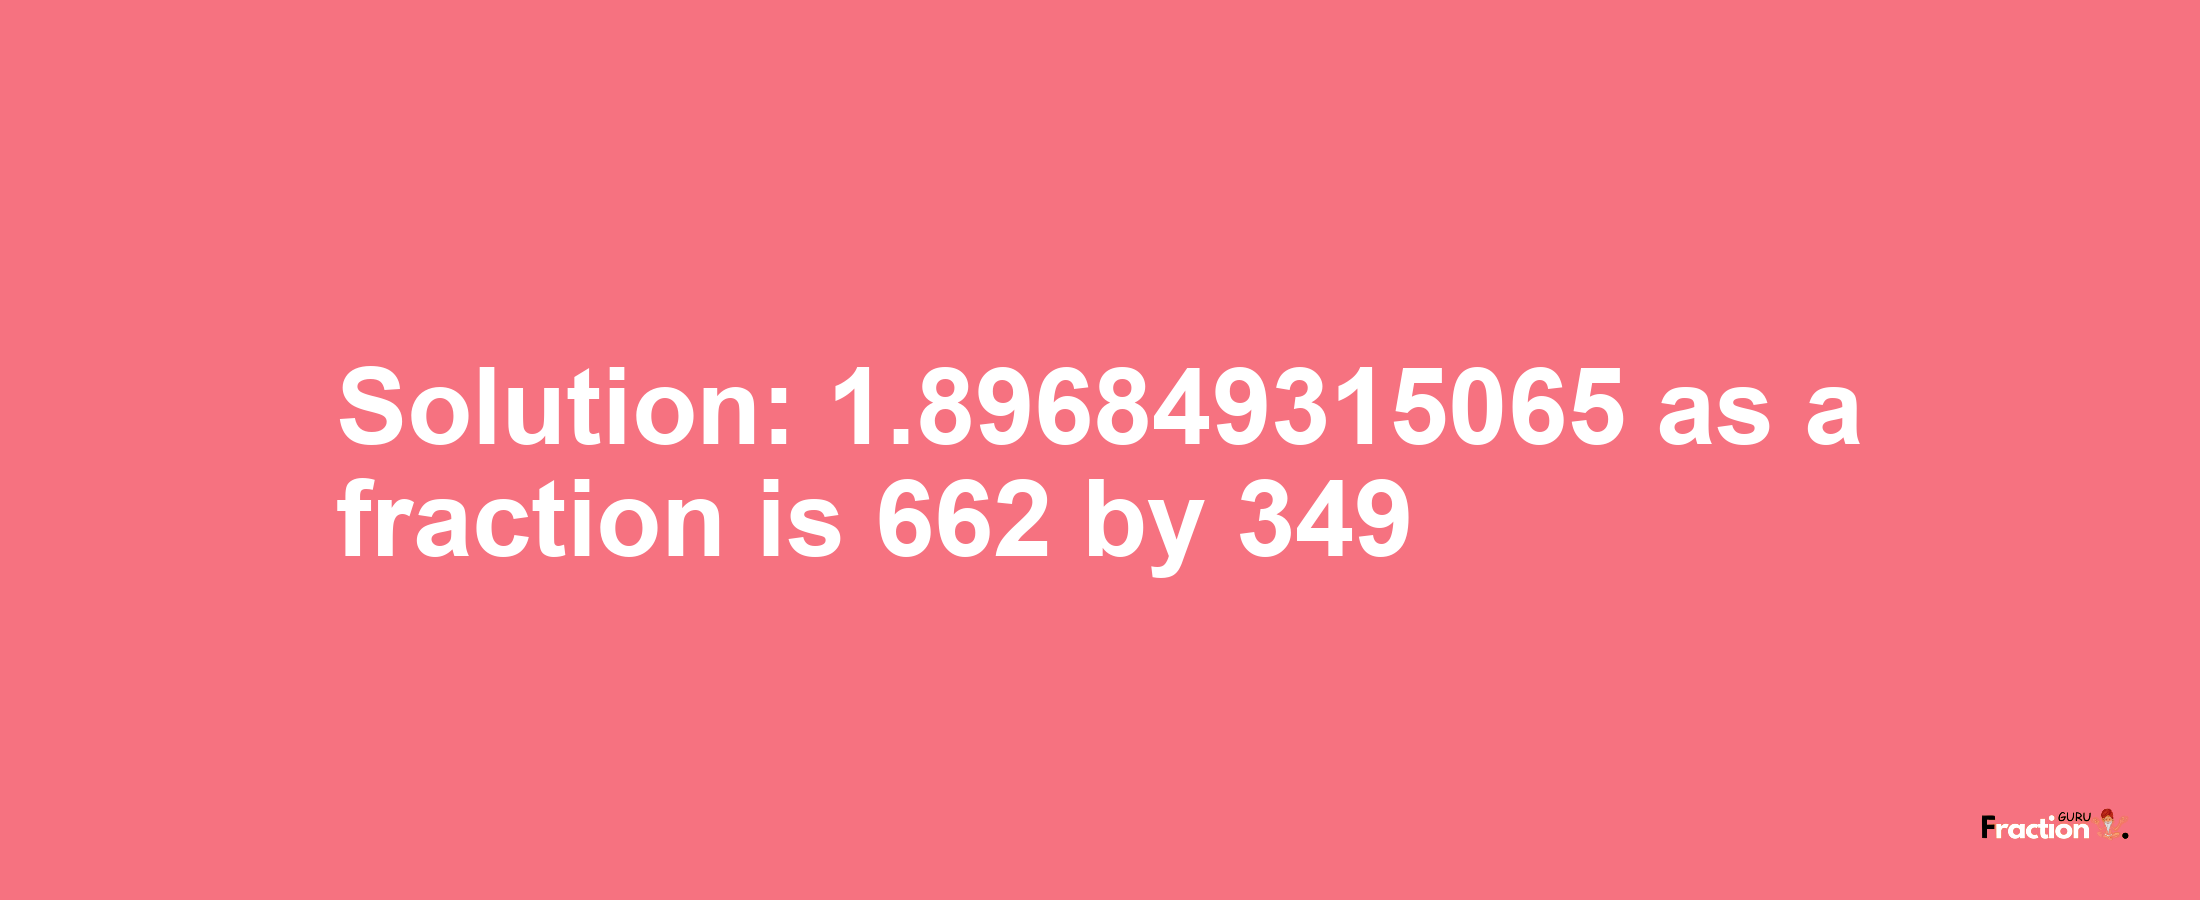 Solution:1.896849315065 as a fraction is 662/349